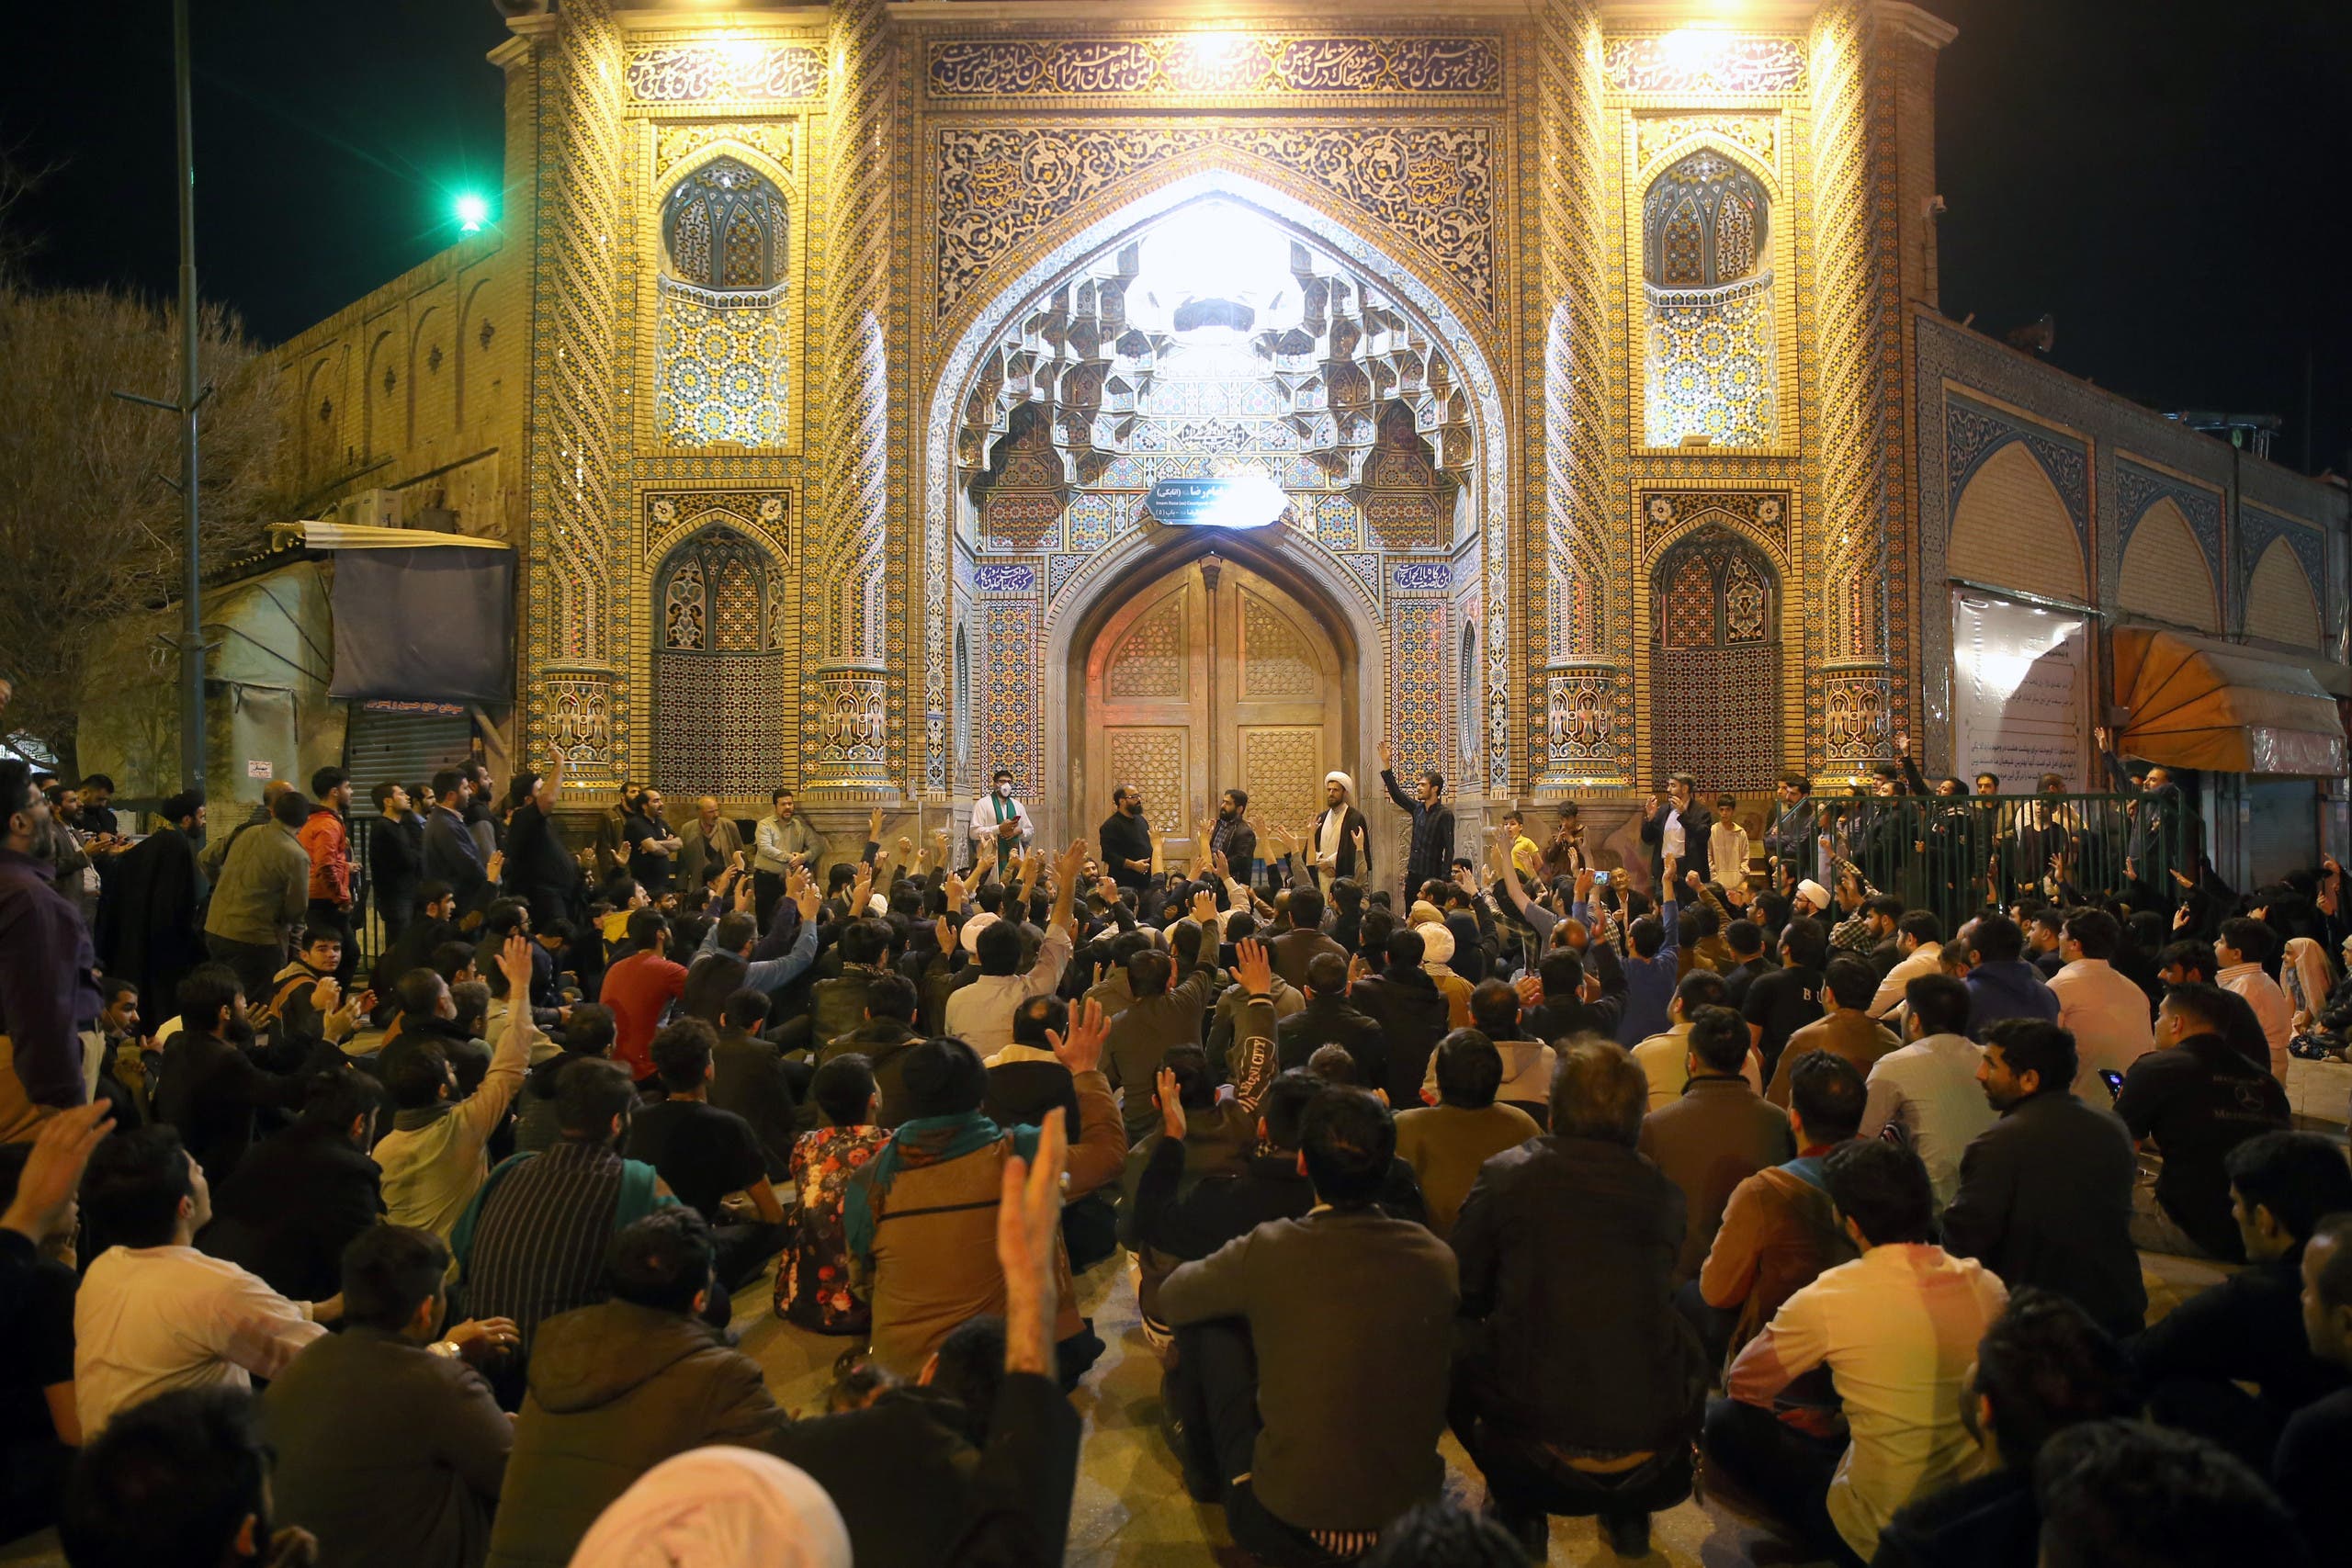 People gather outside the closed doors of the Fatima Masumeh shrine in Iran's holy city of Qom on March 16, 2020. (File photo: AFP)